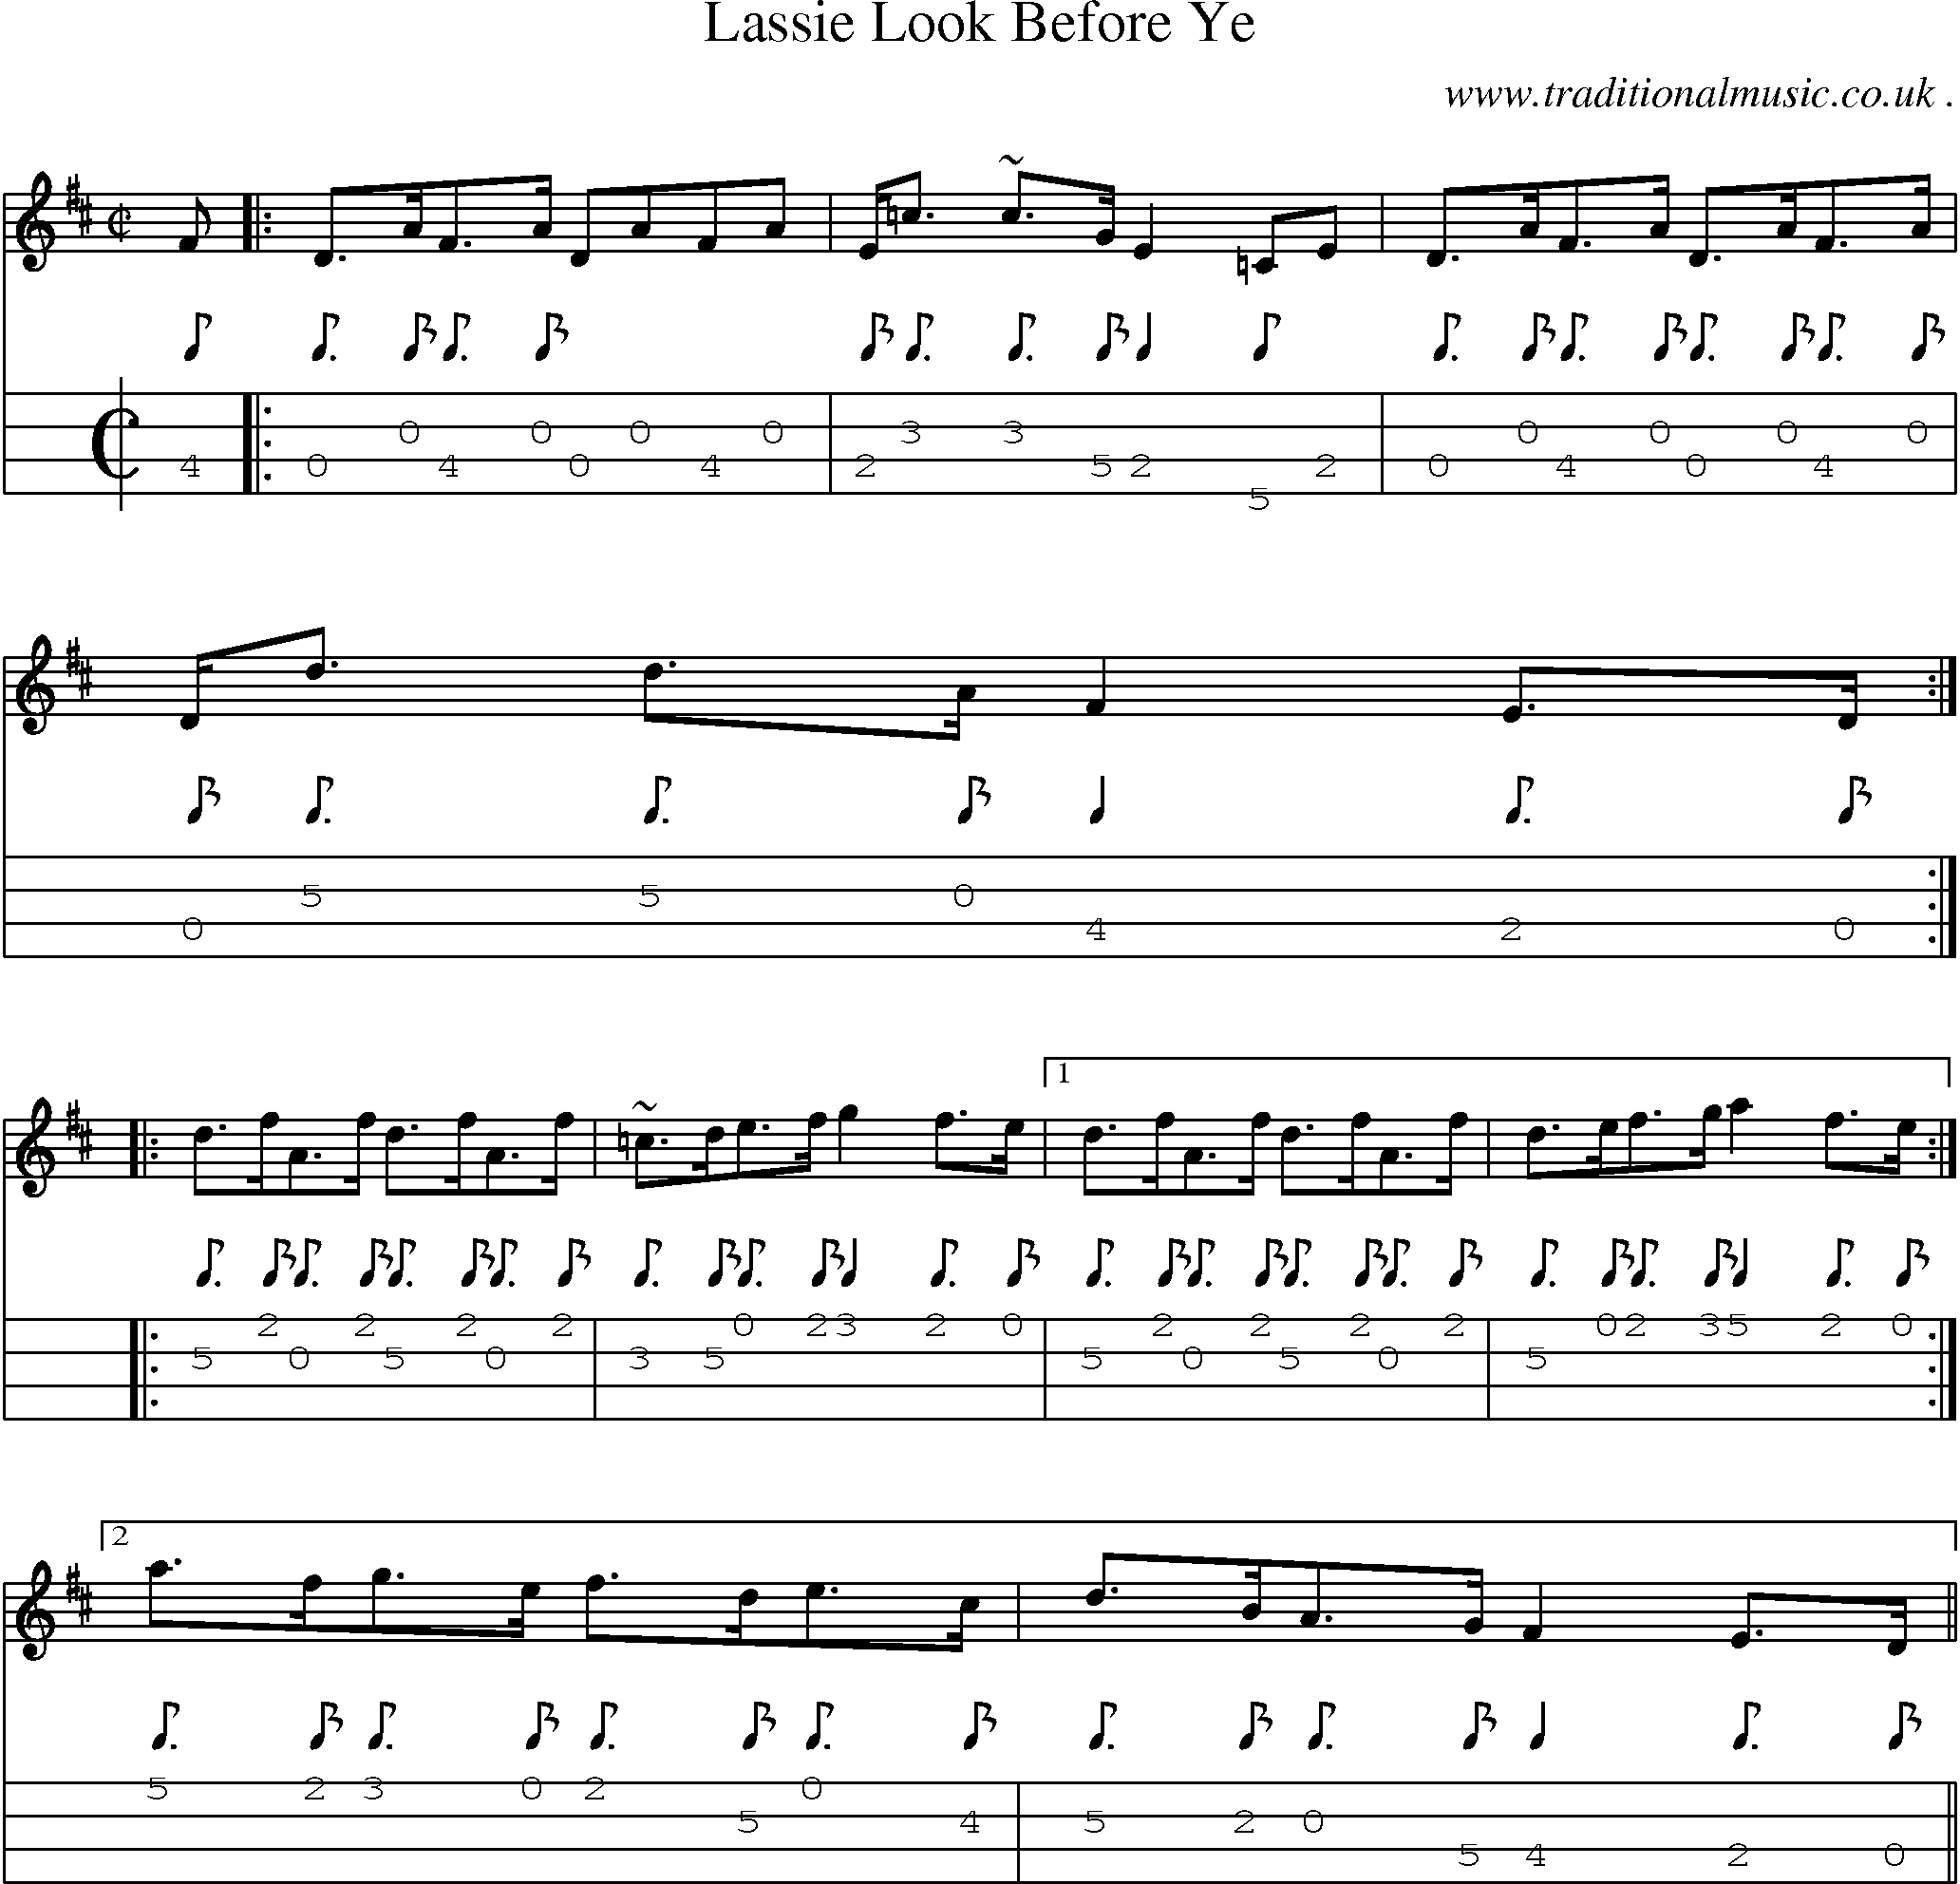 Sheet-music  score, Chords and Mandolin Tabs for Lassie Look Before Ye